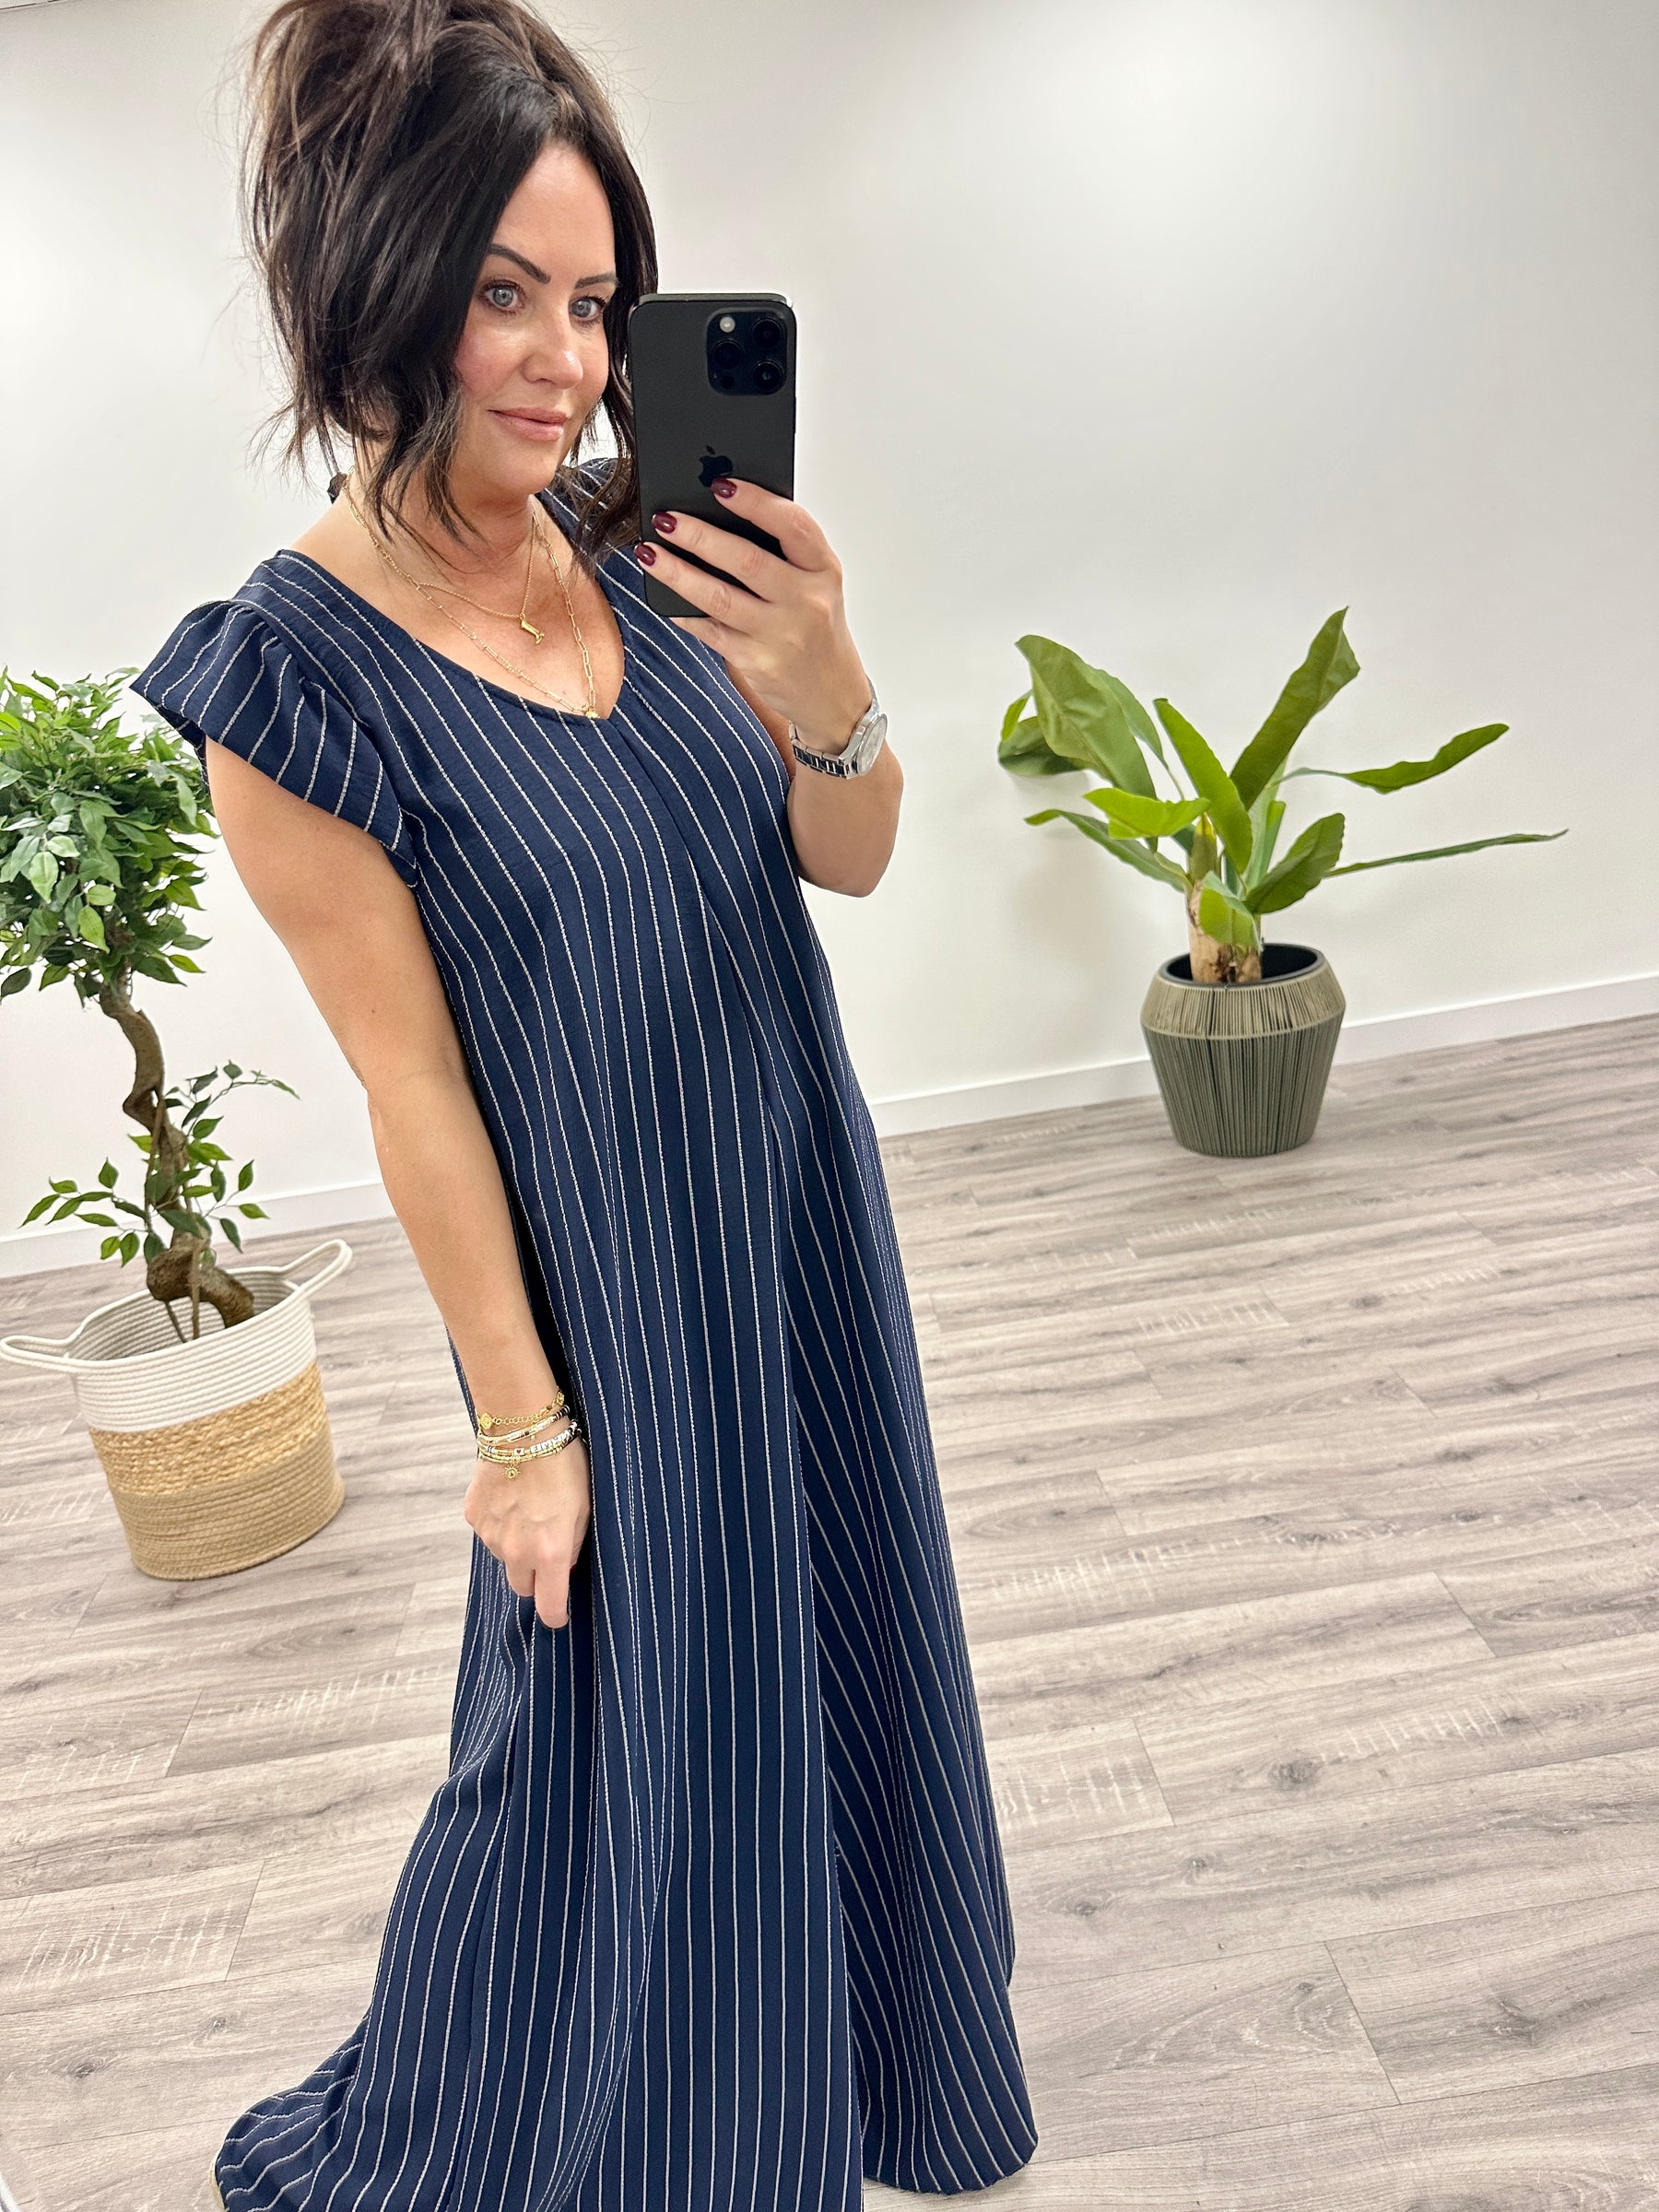 The Pinstripe Jumpsuit - Navy